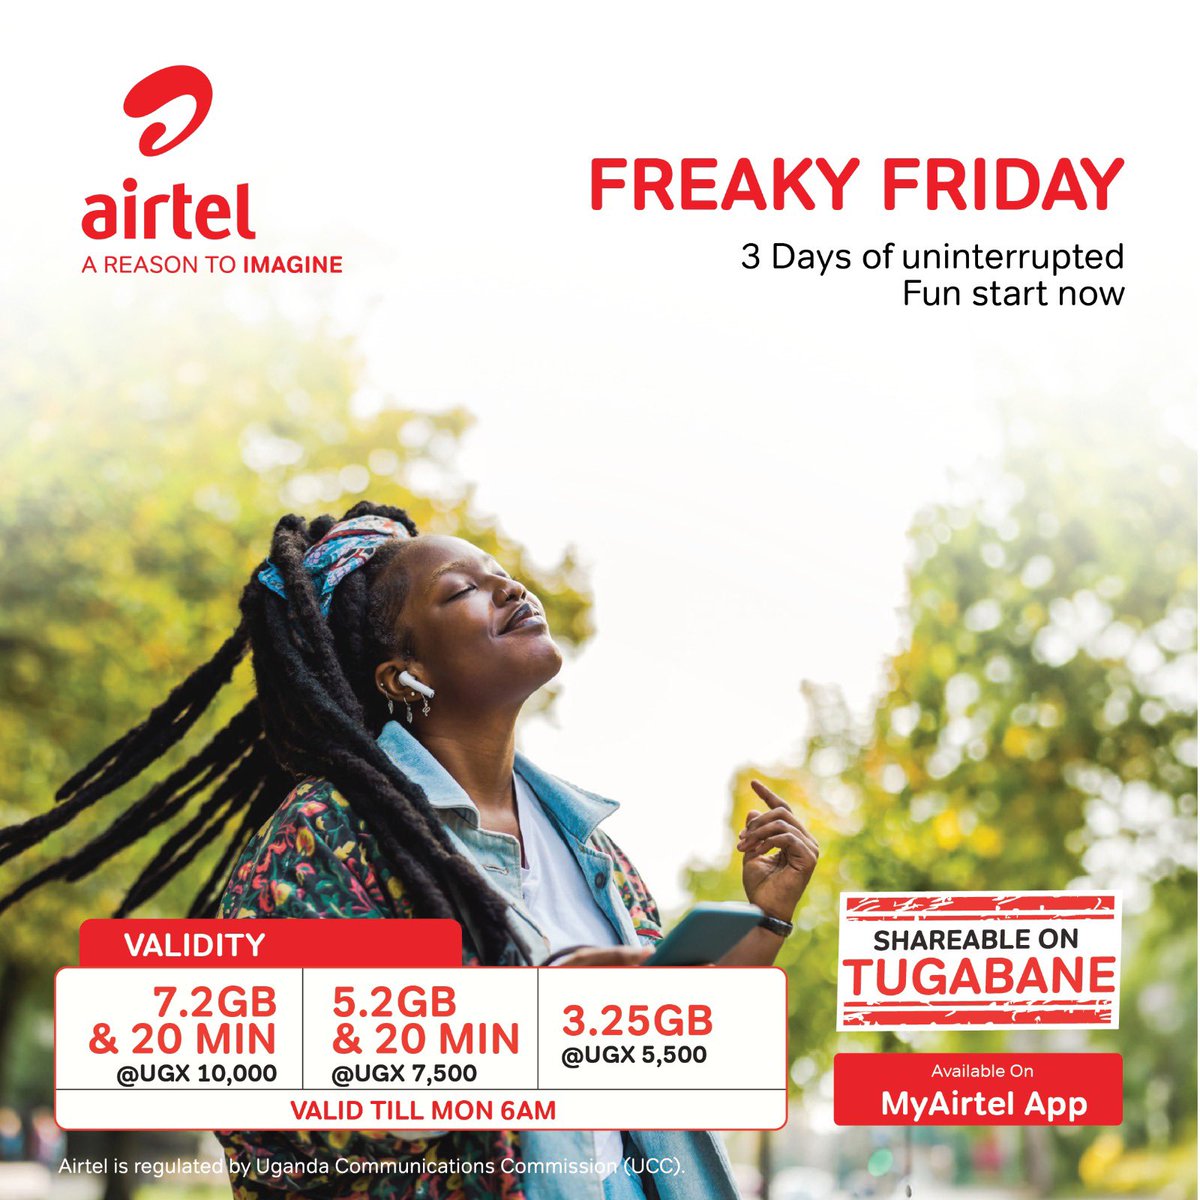 Hey , reminding you to enjoy your weekend along with a #freakyfriday bundle❕by simply dailing  *100# and choose option 0  to get your preferred bundle or use #MyAirtelApp at airtelafrica.onelink.me/cGyr/qgj4qeu2